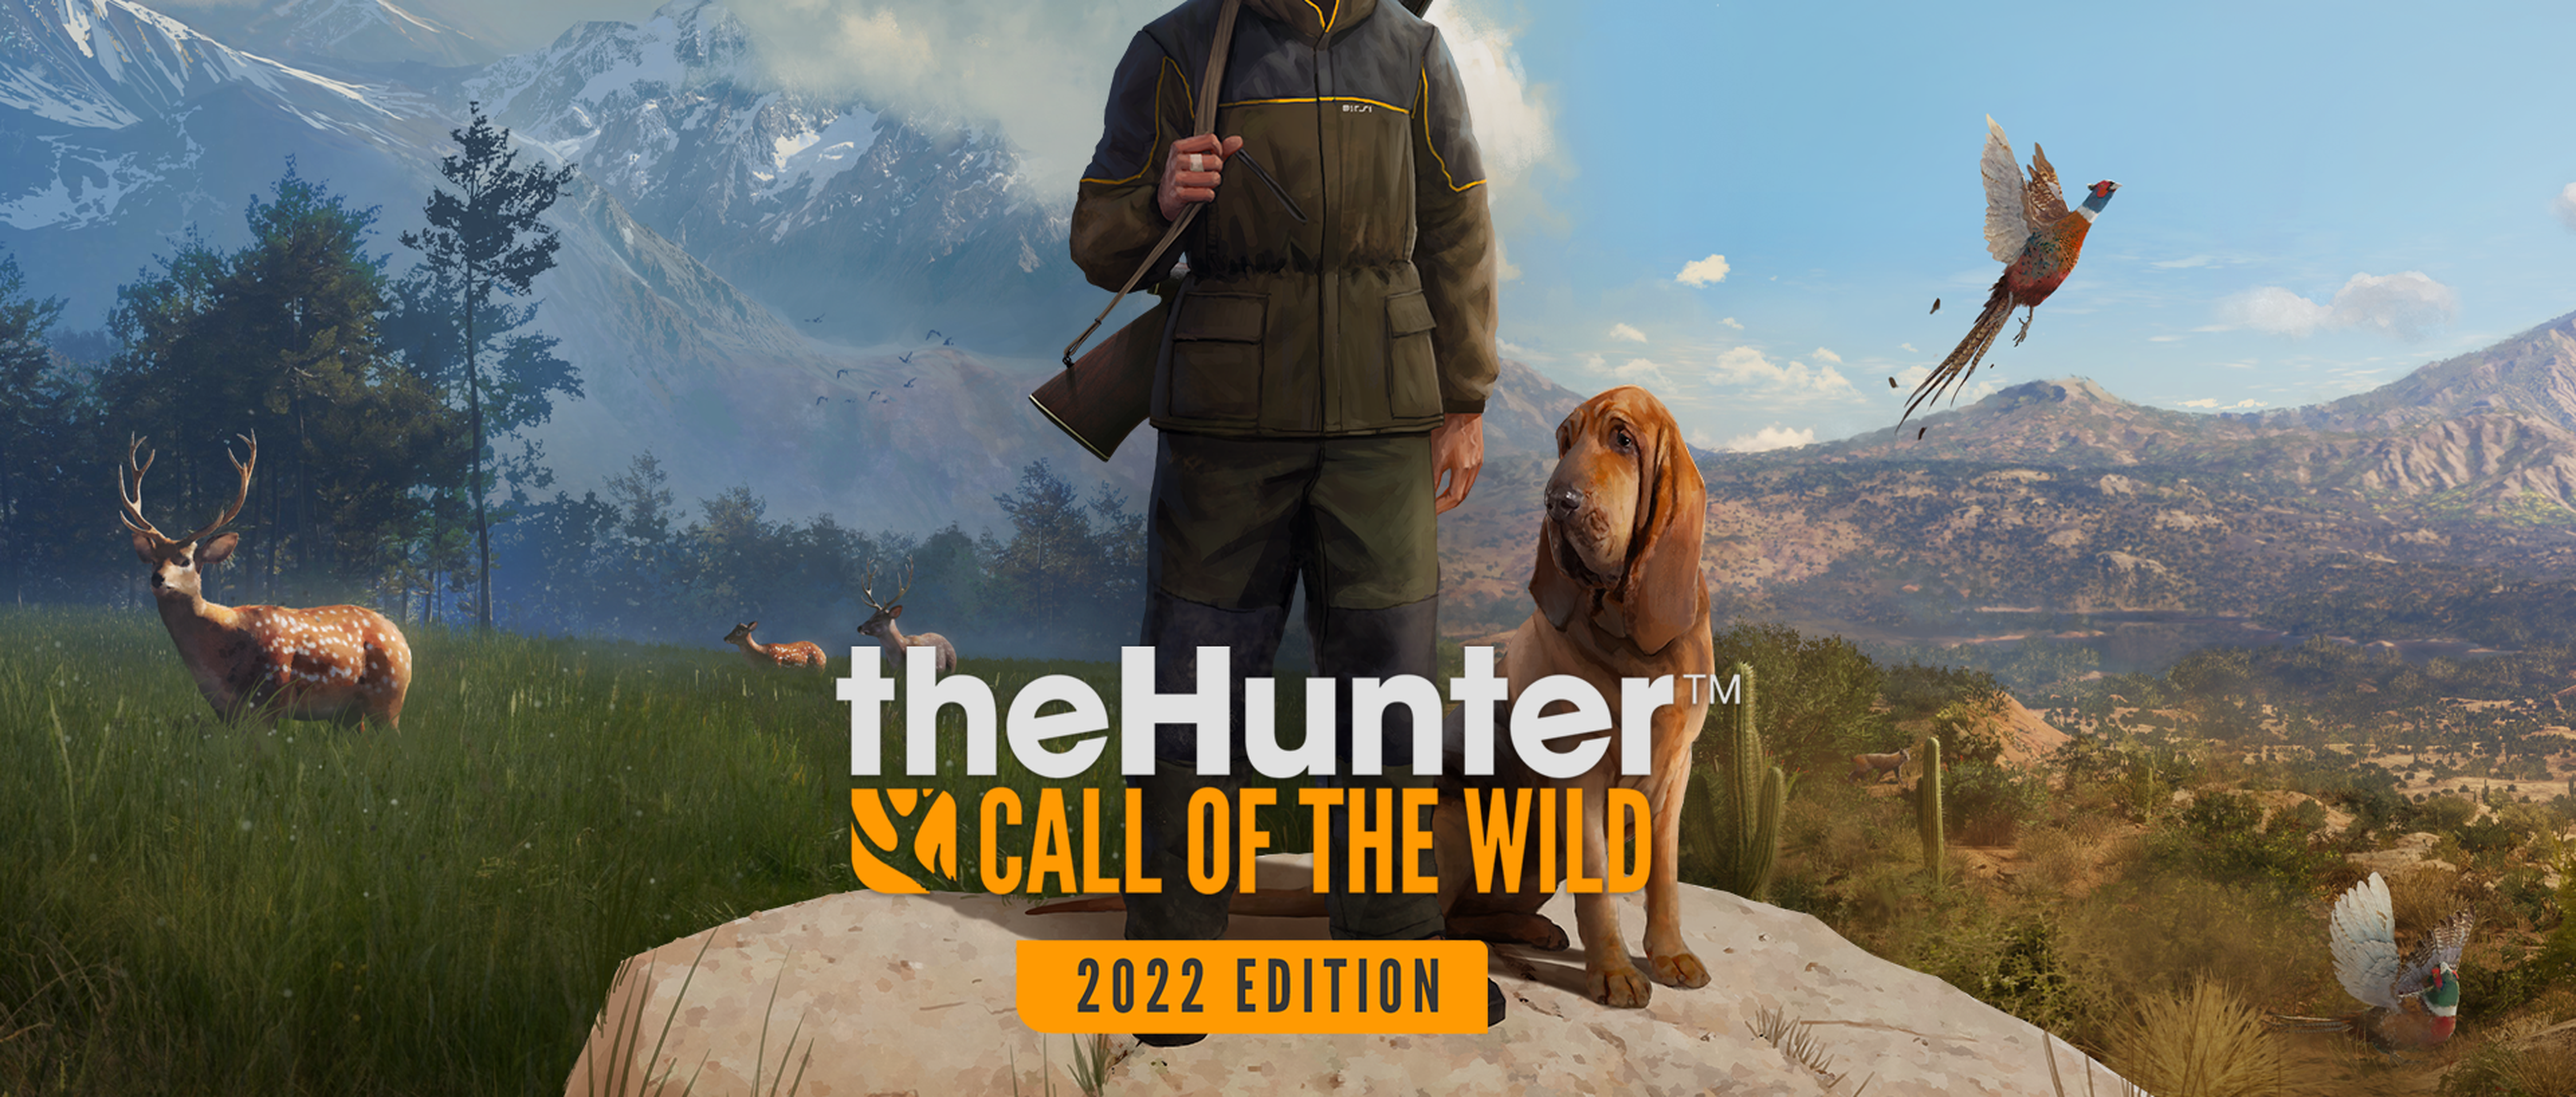 the hunter call of the wild cheat codes pc